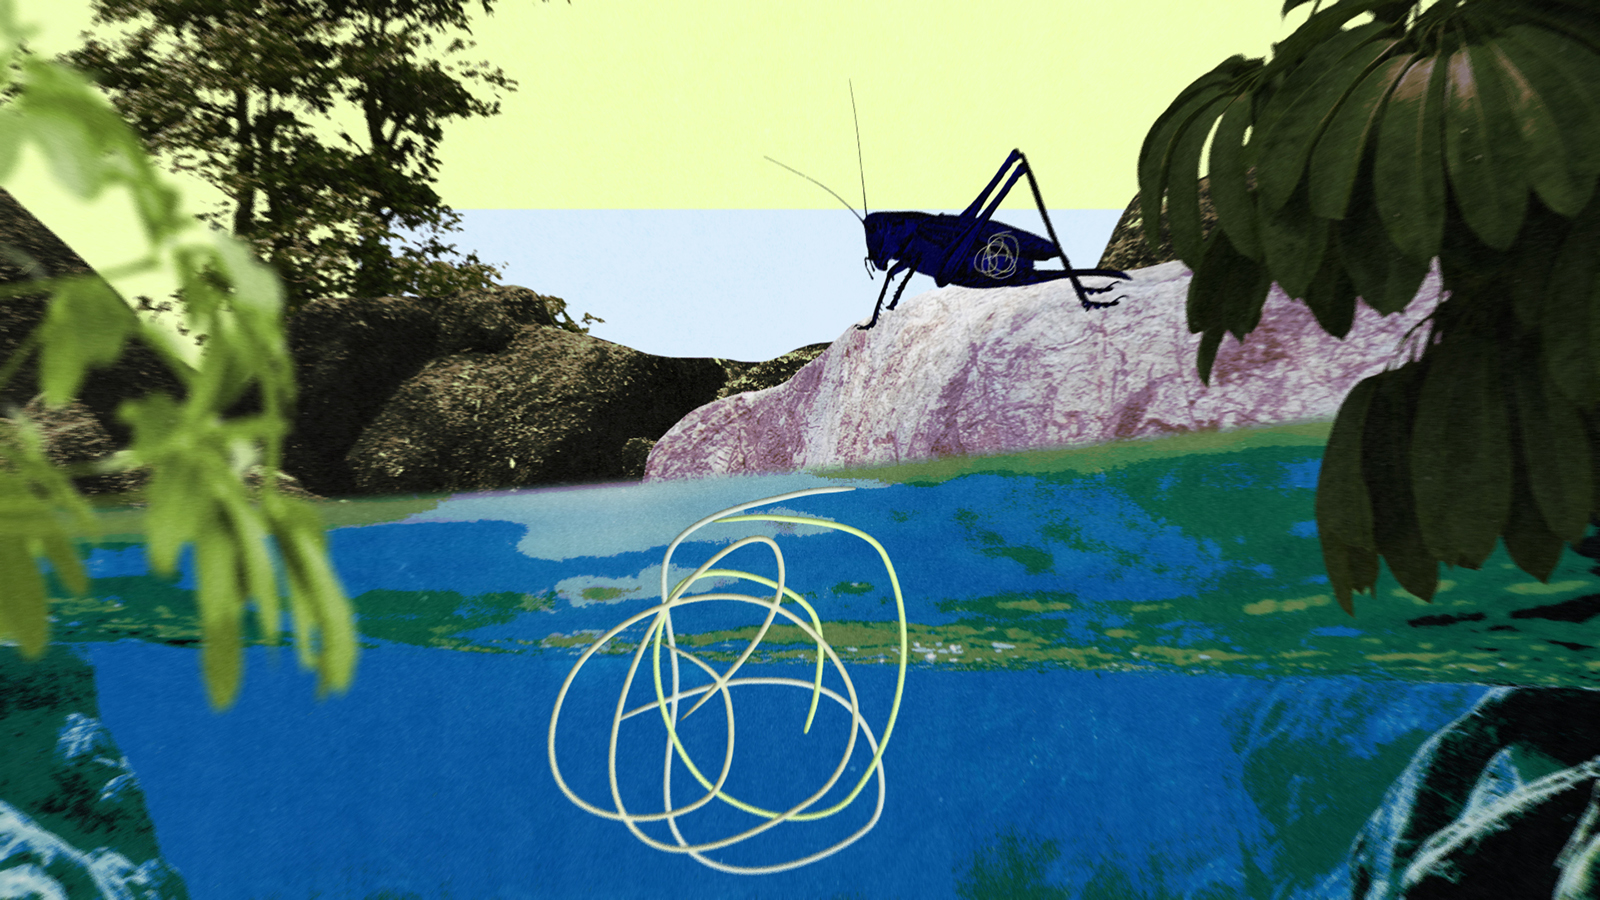 An illustration depicts a parasitic nematamorph worm floating in a creek, while a cricket infected with the parasite stands at the creek's edge.